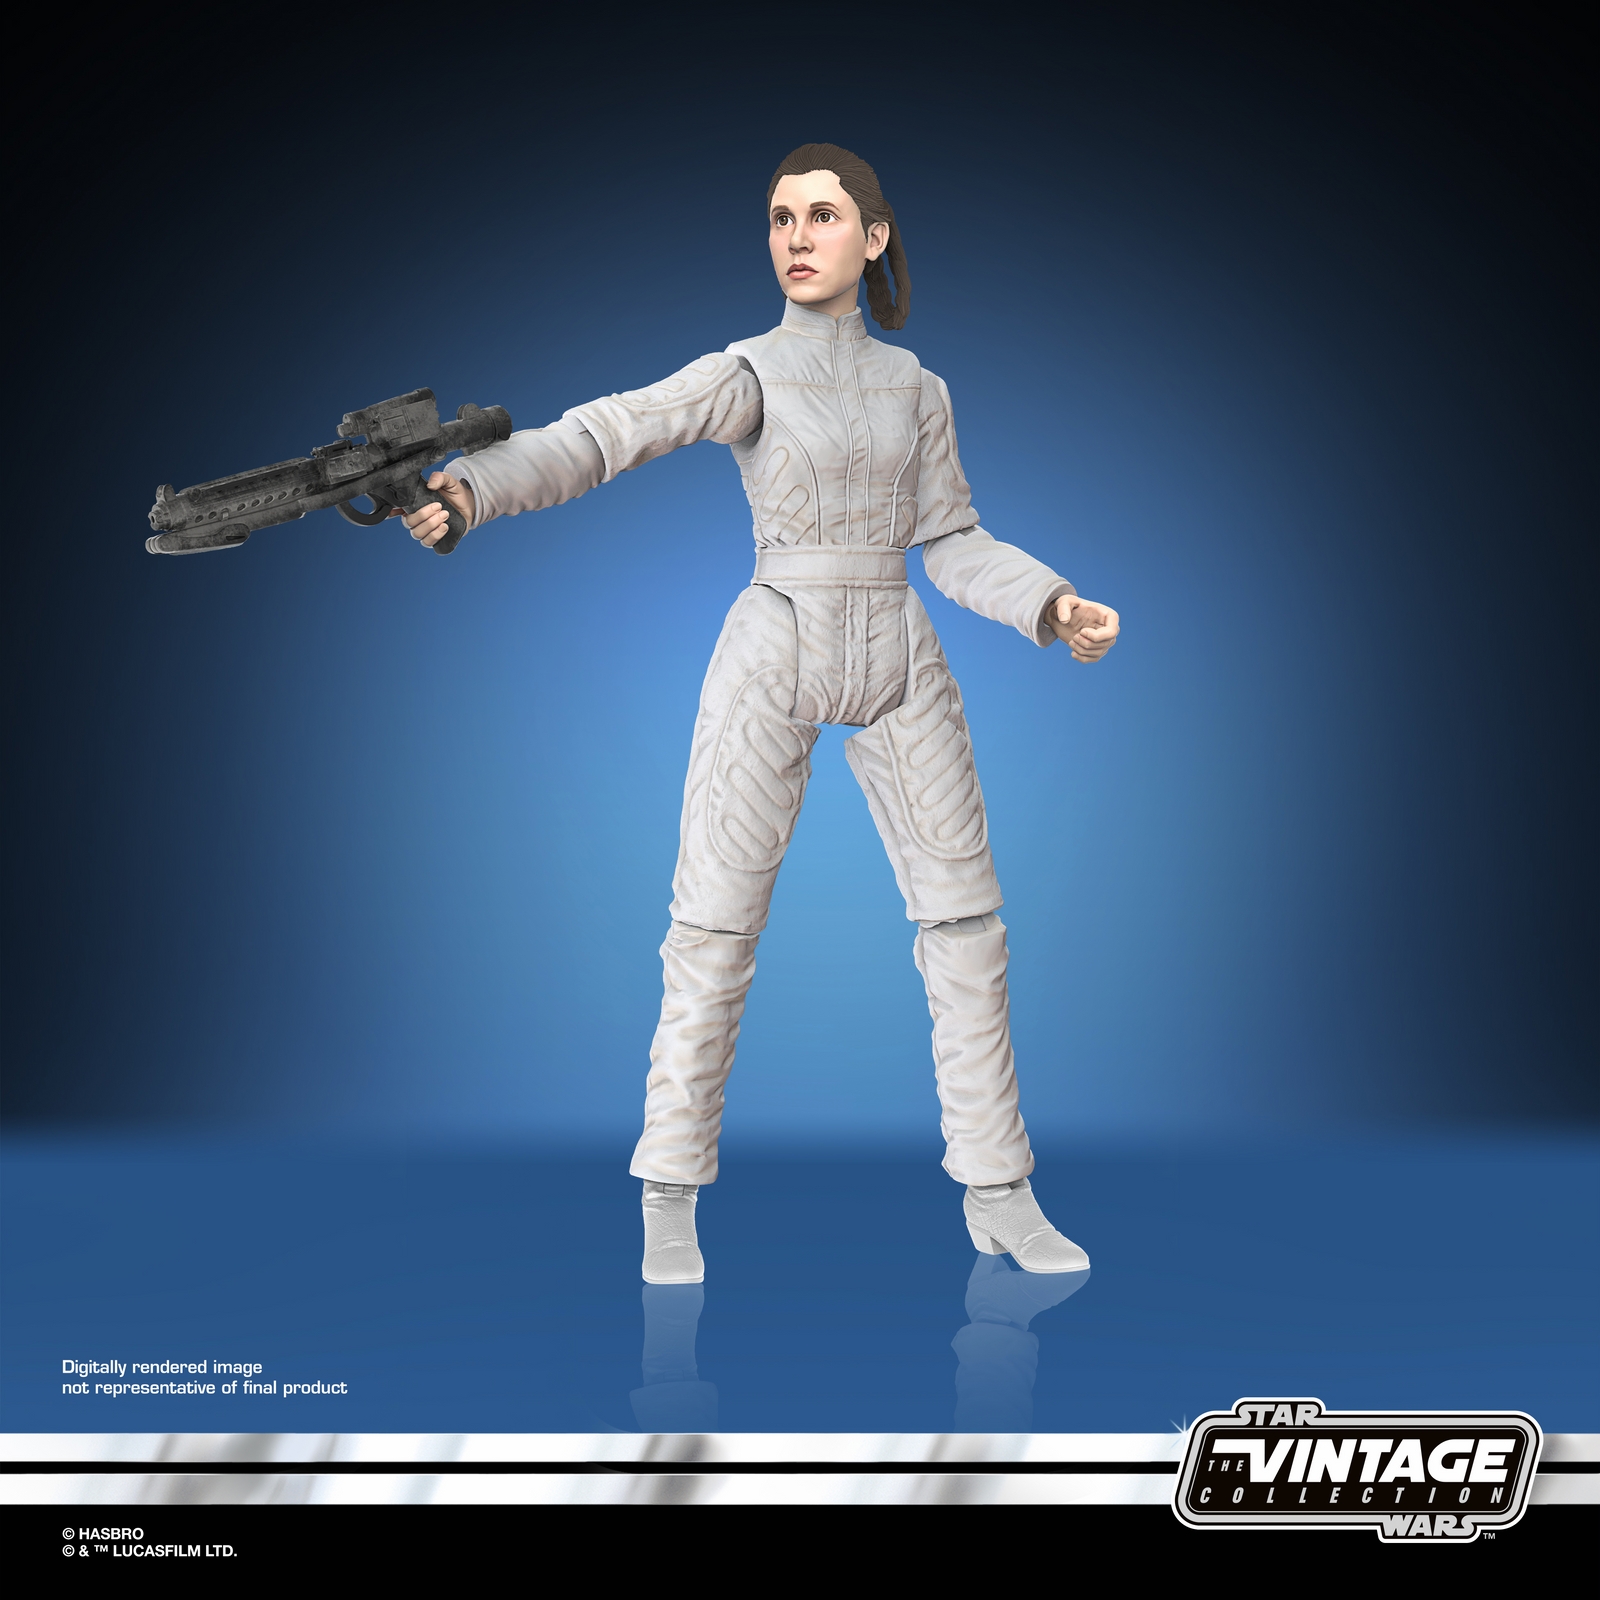 STAR WARS THE VINTAGE COLLECTION 3.75-INCH PRINCESS LEIA ORGANA (BESPIN ESCAPE) Figure - digital oop (2).jpg